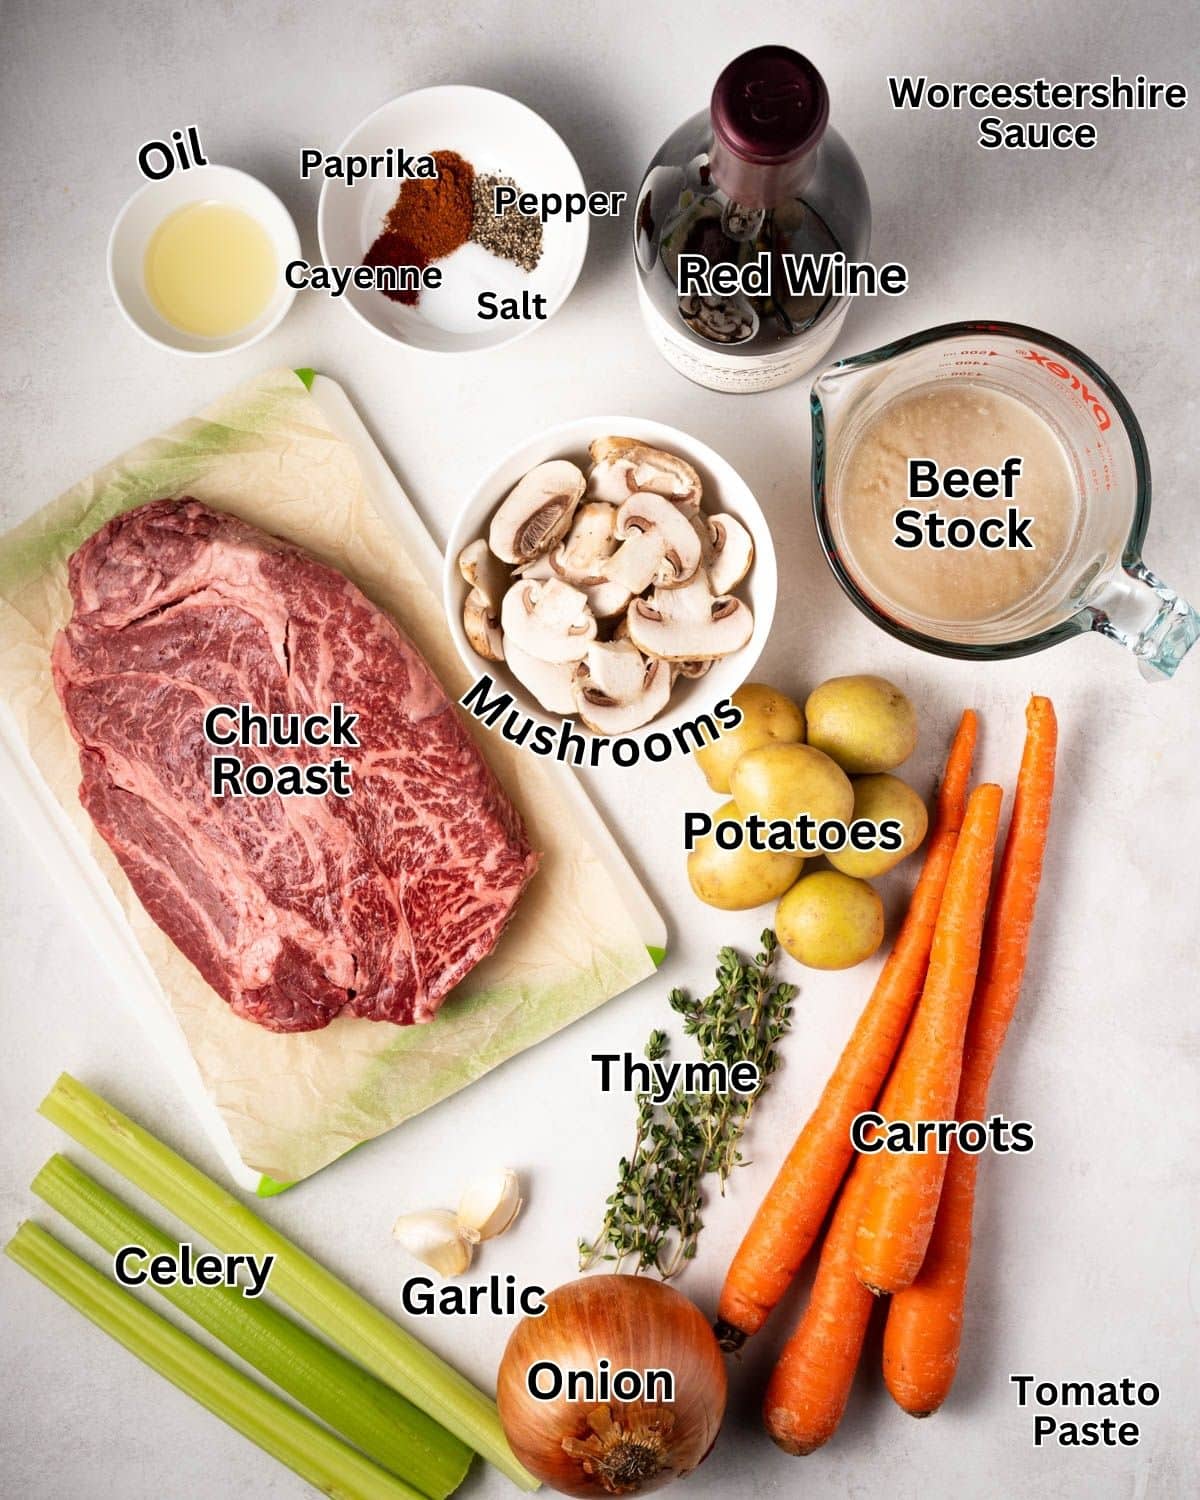 Ingredients needed for instant pot beef stew laid out on a white background: beef chuck roast, onions, garlic, celery, carrots, potatoes, mushrooms, beef stock, red wine, oil, Worcestershire sauce, tomato paste, salt, pepper, paprika, and ground cayenne.